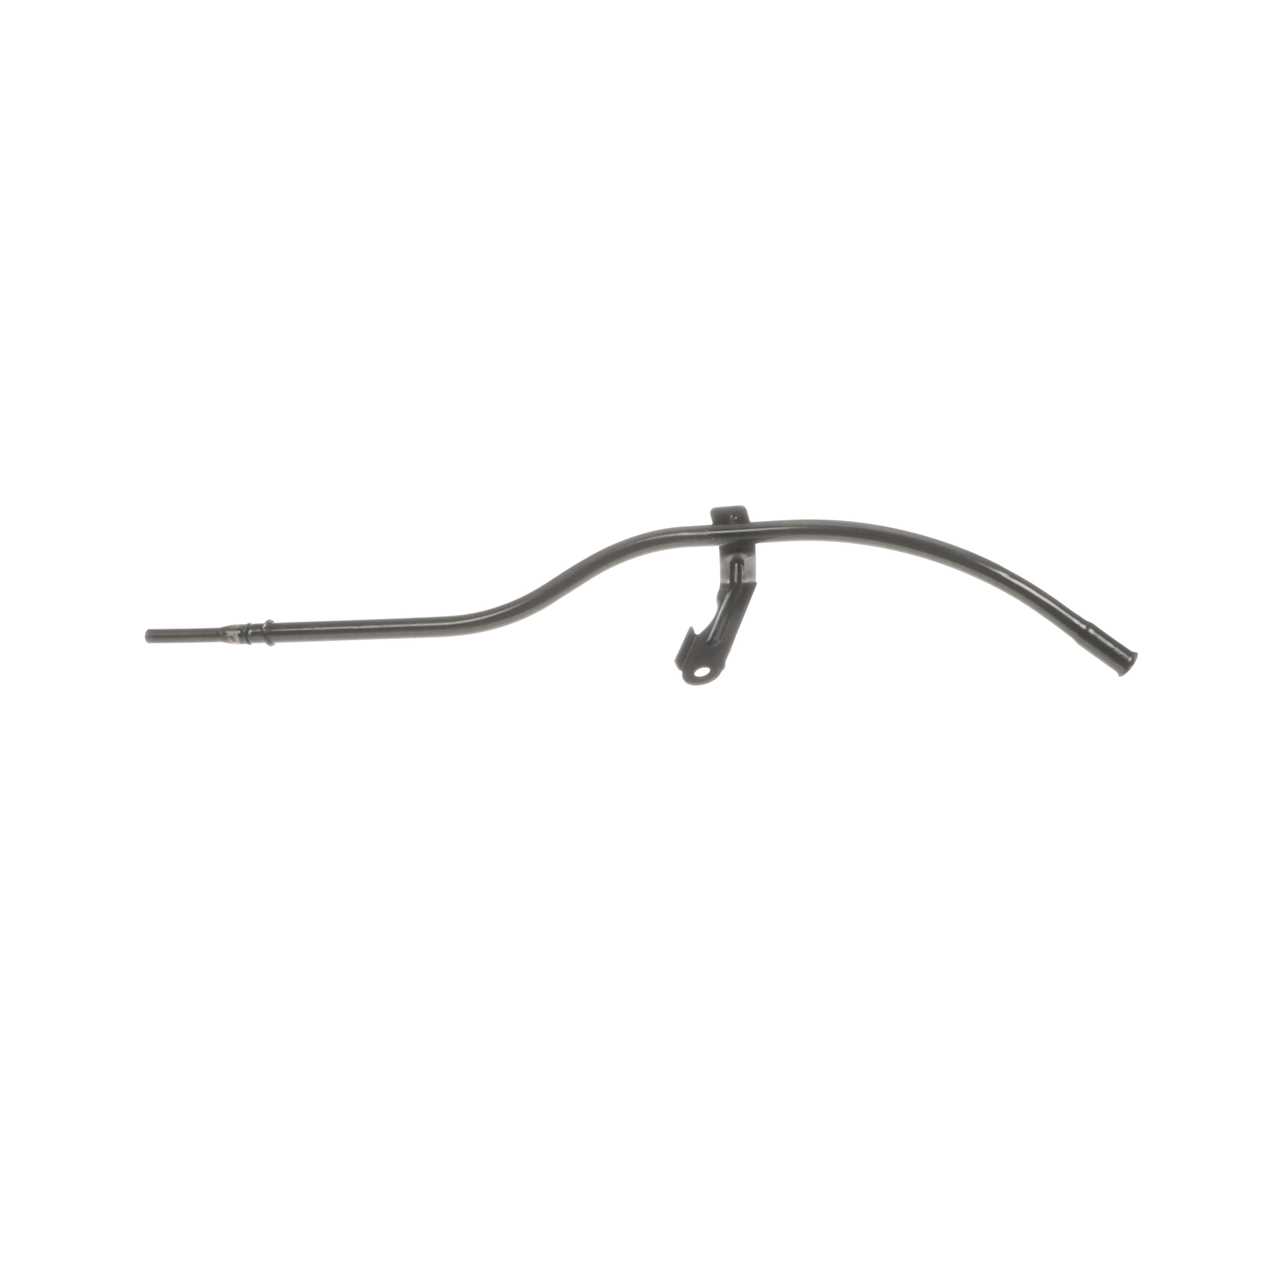 Dorman 921-062 Engine Oil Dipstick Tube - Metal for Specific Ford / Lincoln  / Mercury Models Fits select: 2004-2012 FORD ESCAPE, 2006-2012 FORD FUSION  